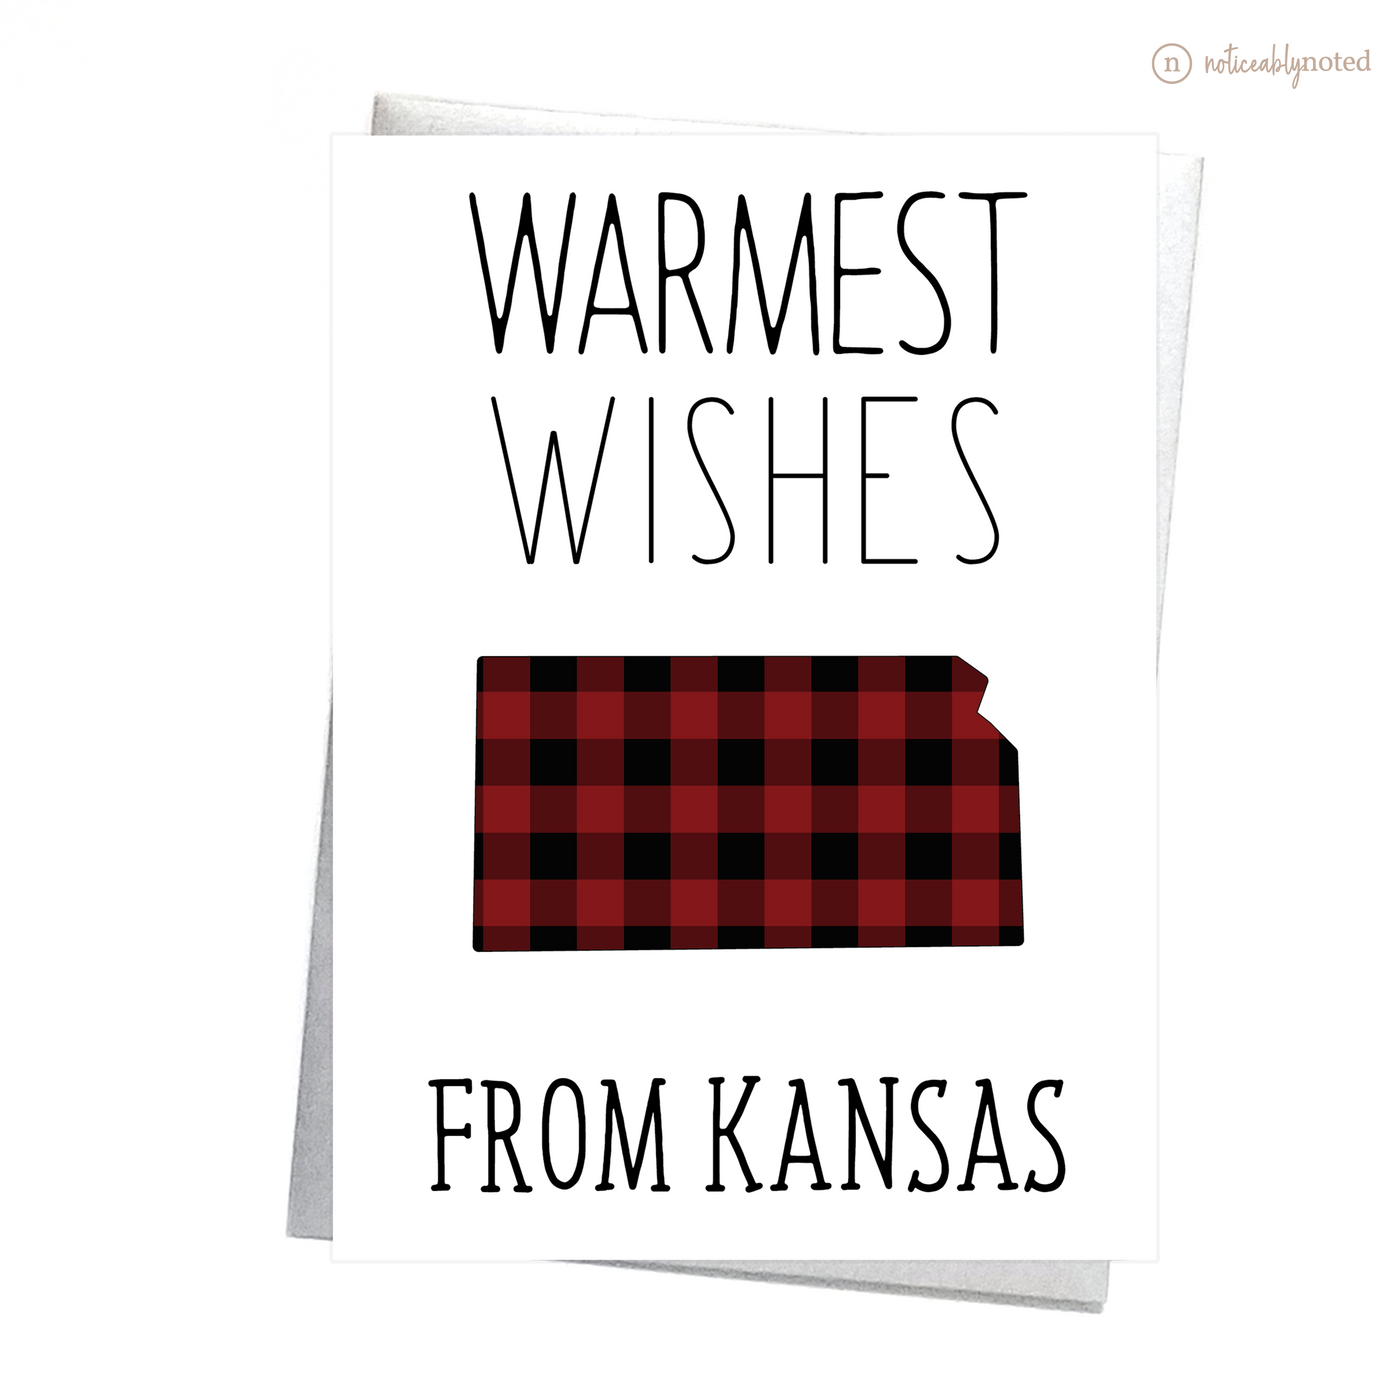 KS Holiday Greeting Cards | Noticeably Noted